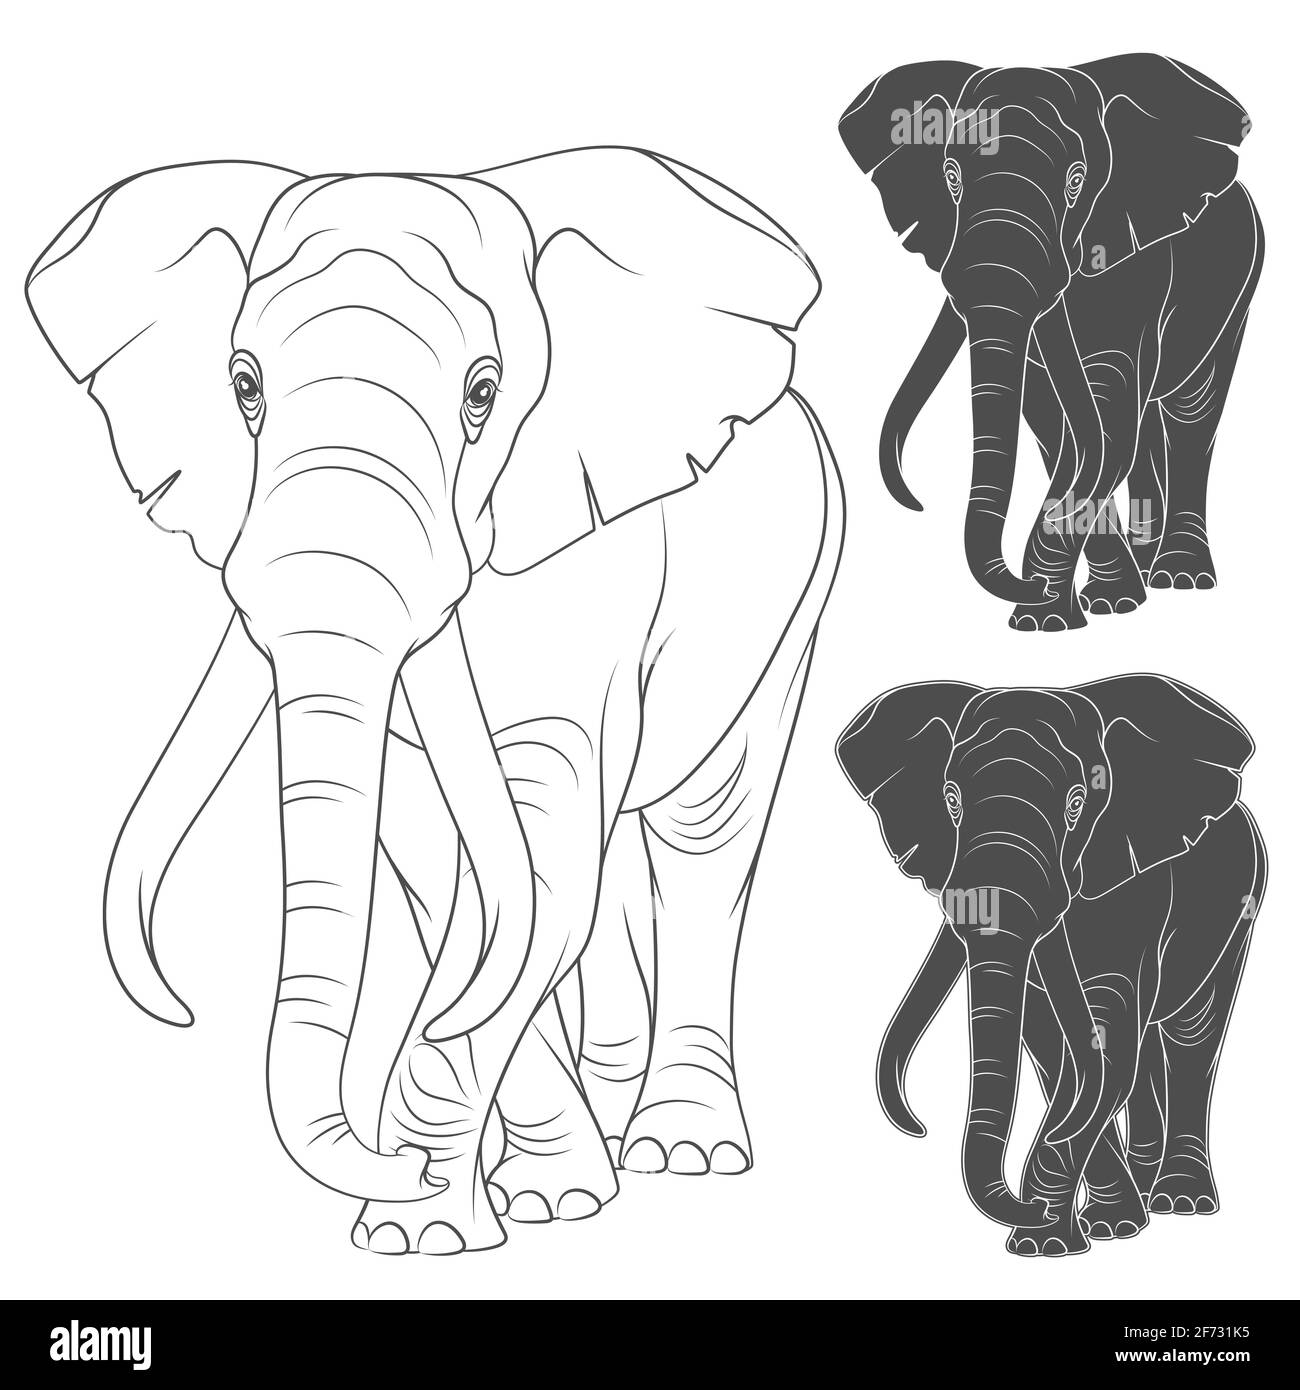 Set of vector illustrations with the elephant. Isolated objects on a white background. Stock Vector